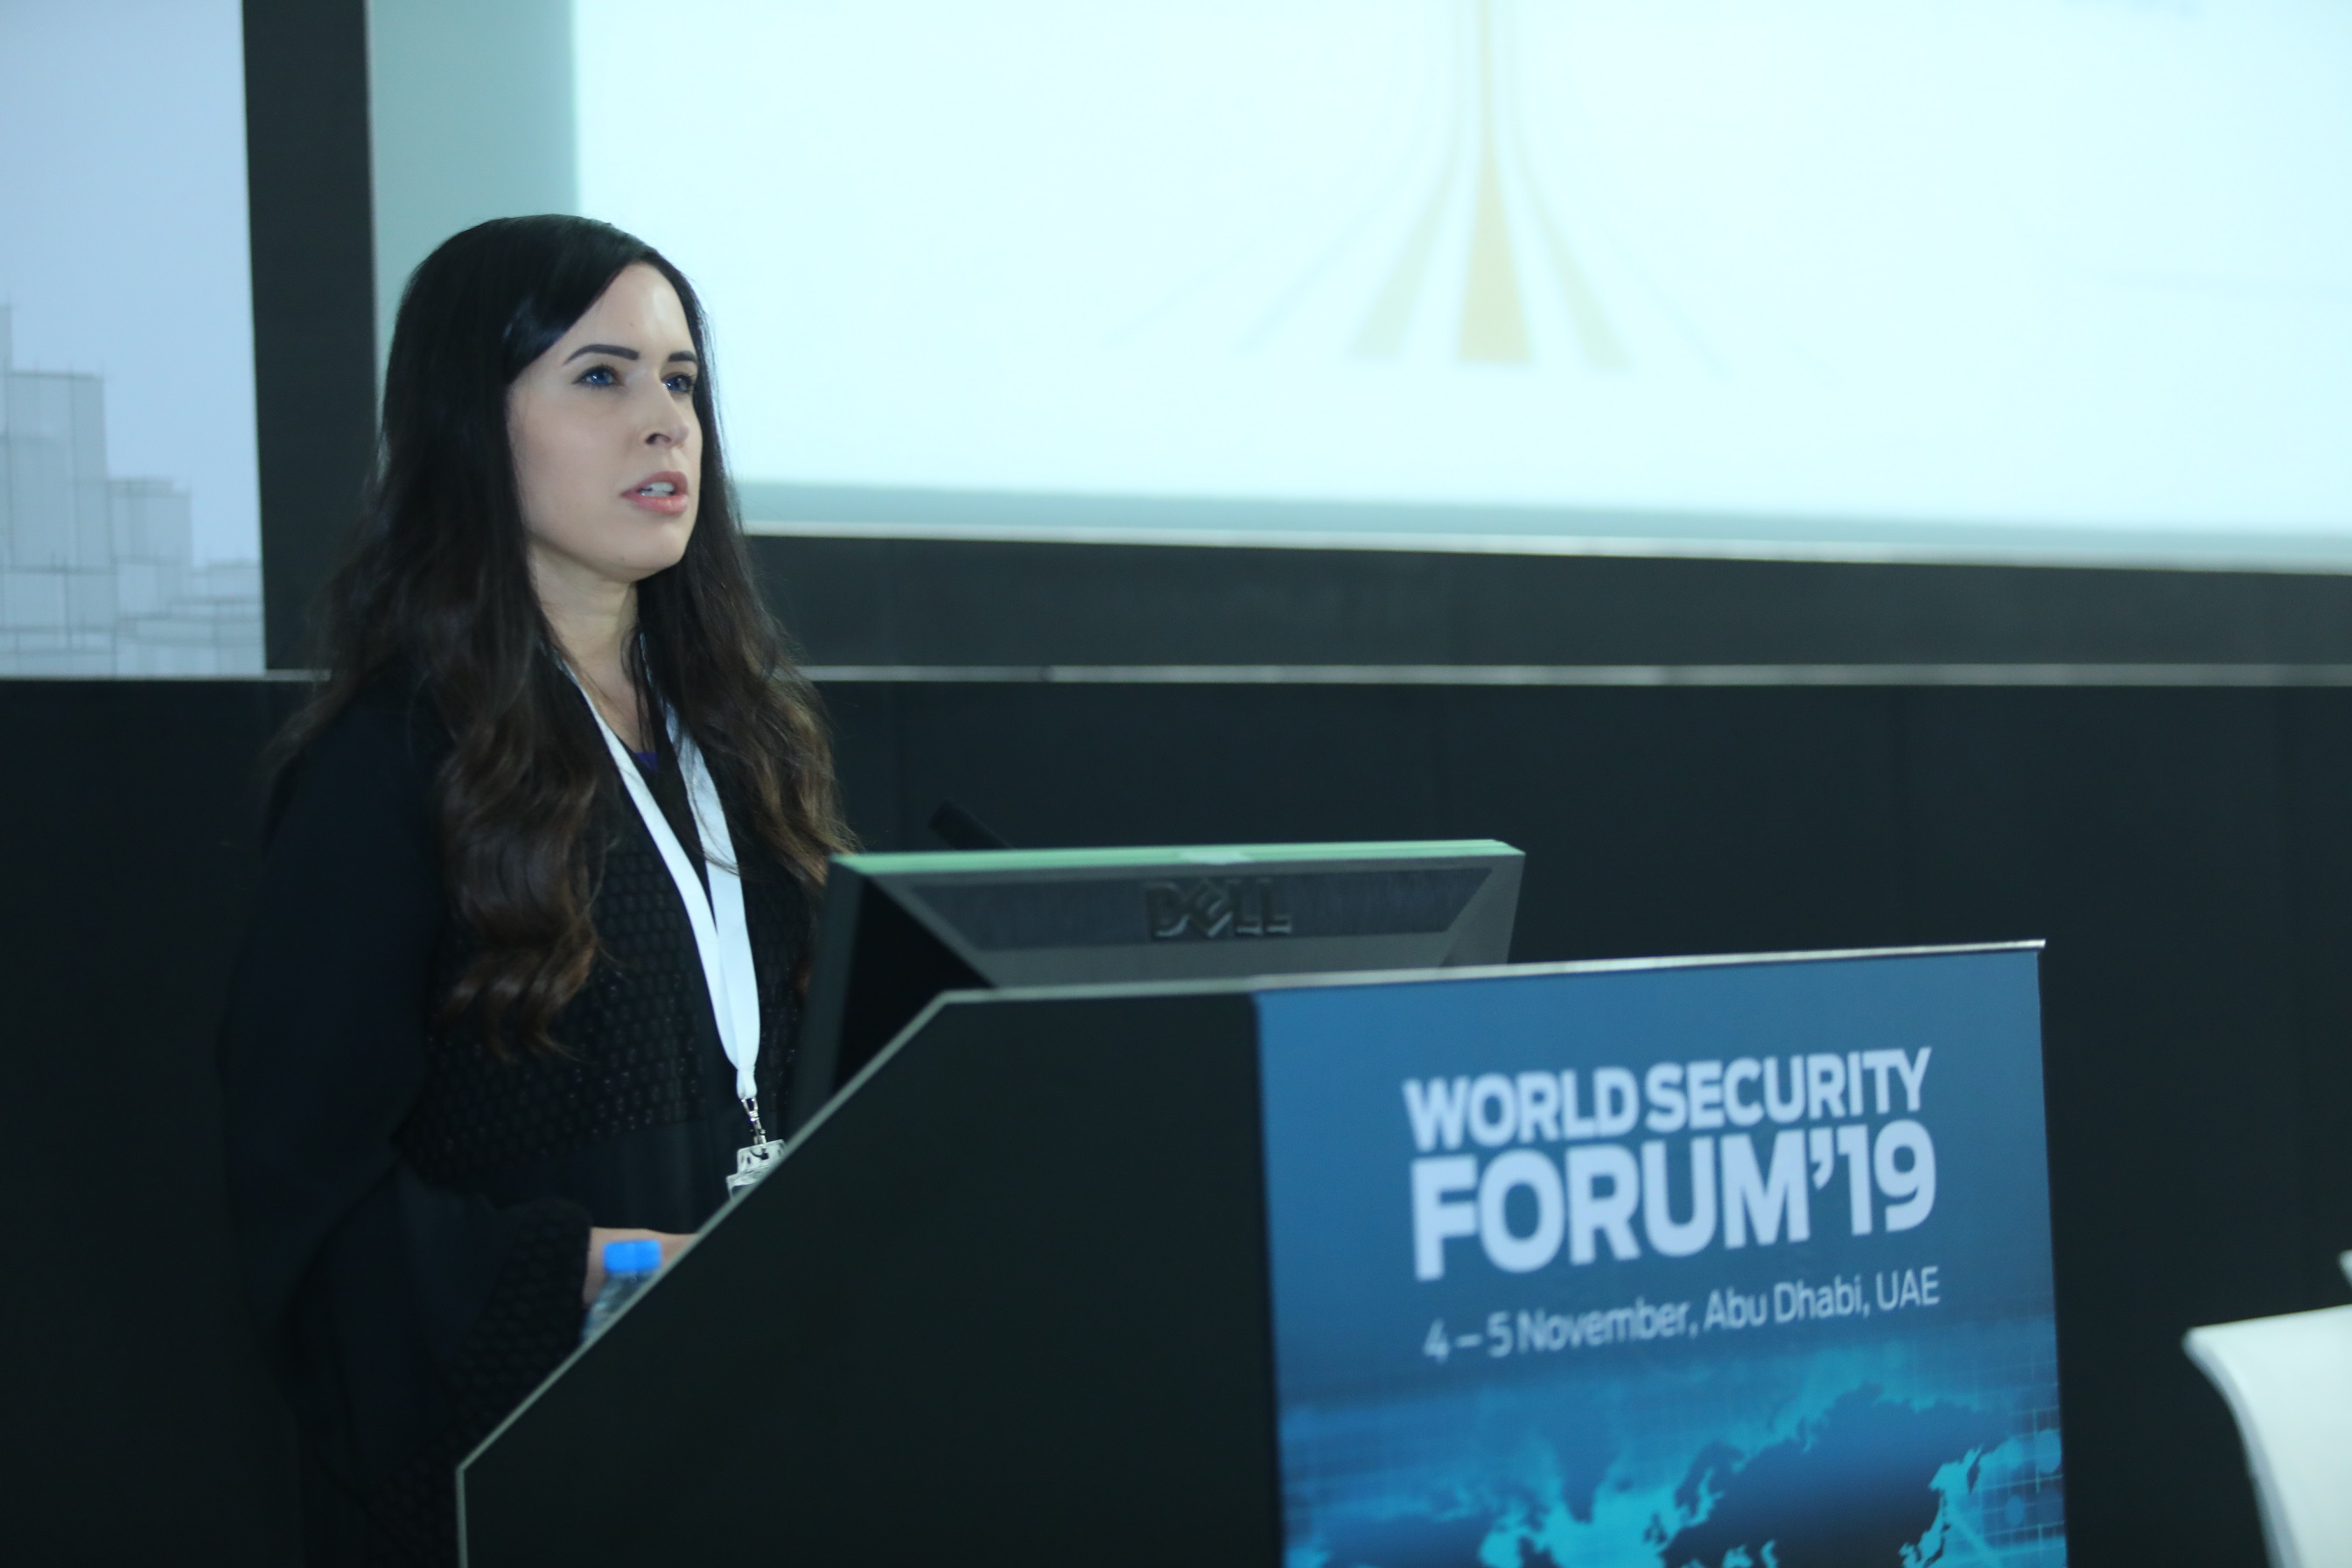 Future Digital Trends Take Centre Stage At World Security Forum